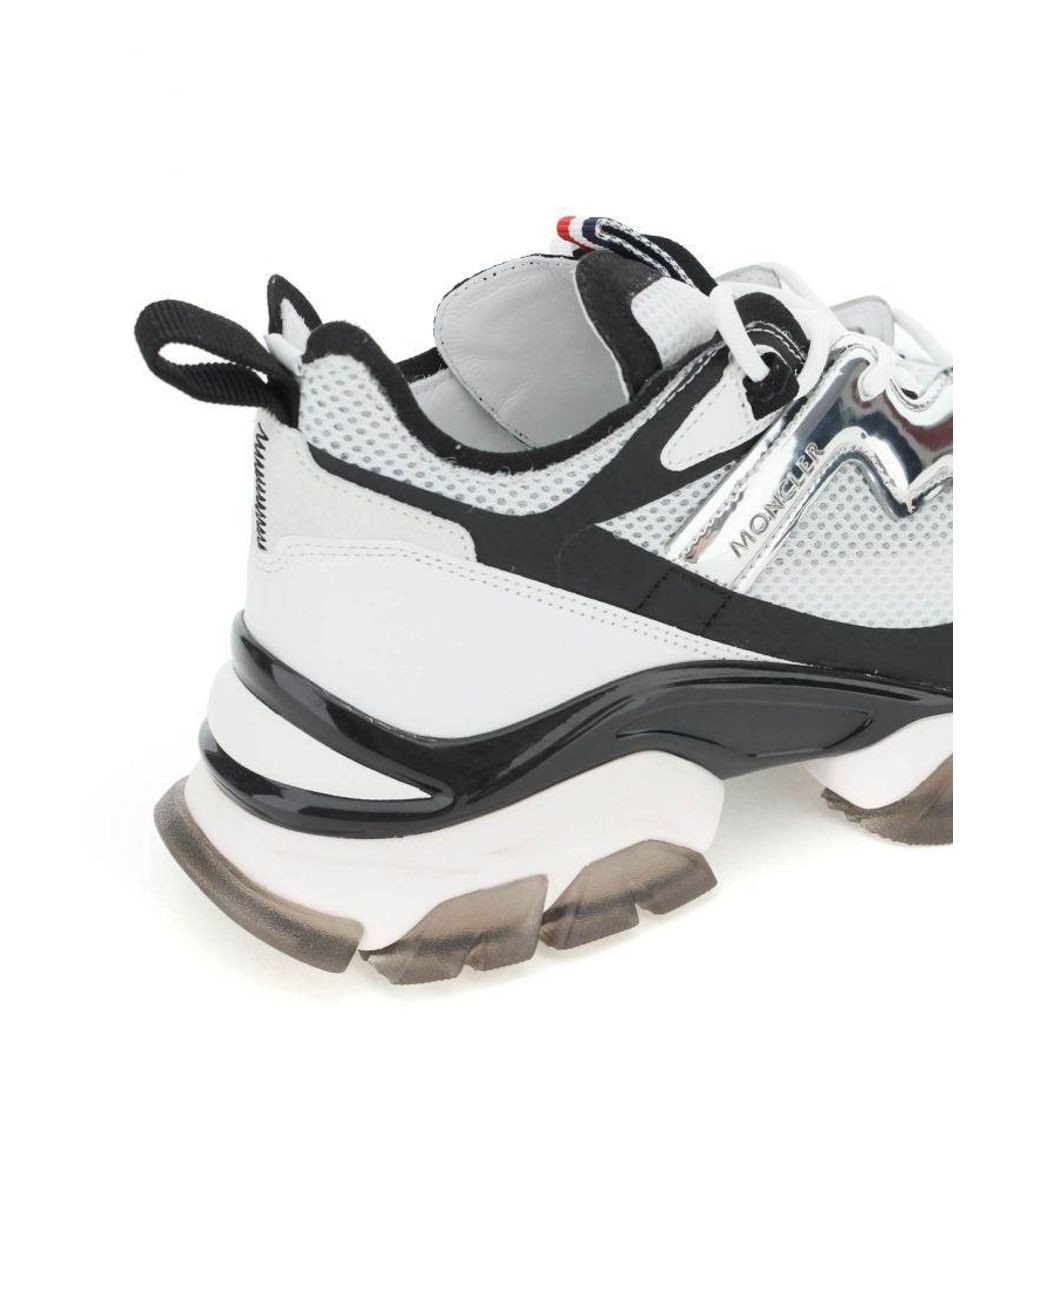 Moncler Leather Leave No Trace Sneakers in White,Black (White) for 